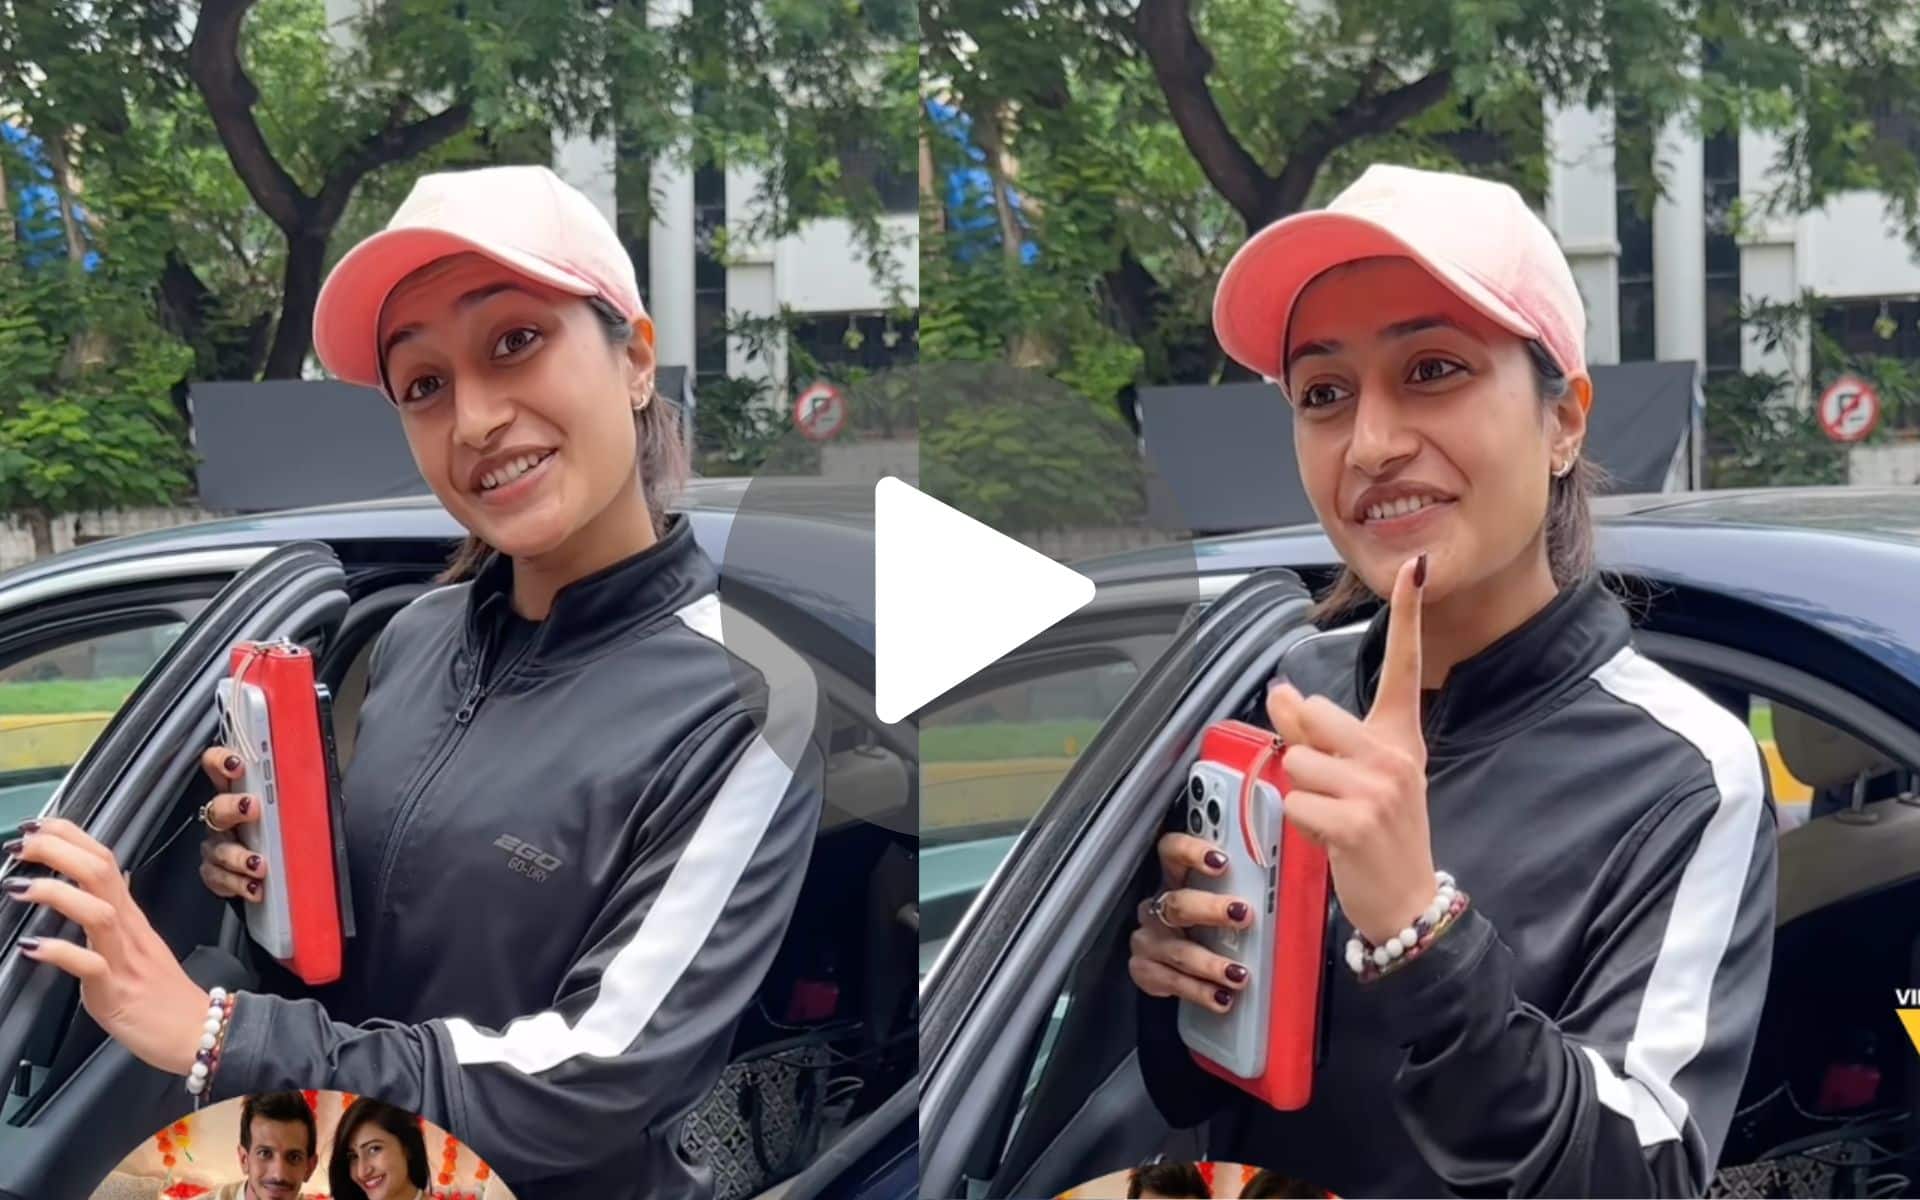 [Watch] Chahal's Wife Dhanashree Verma's 'Excited' Response After India's T20 WC Win